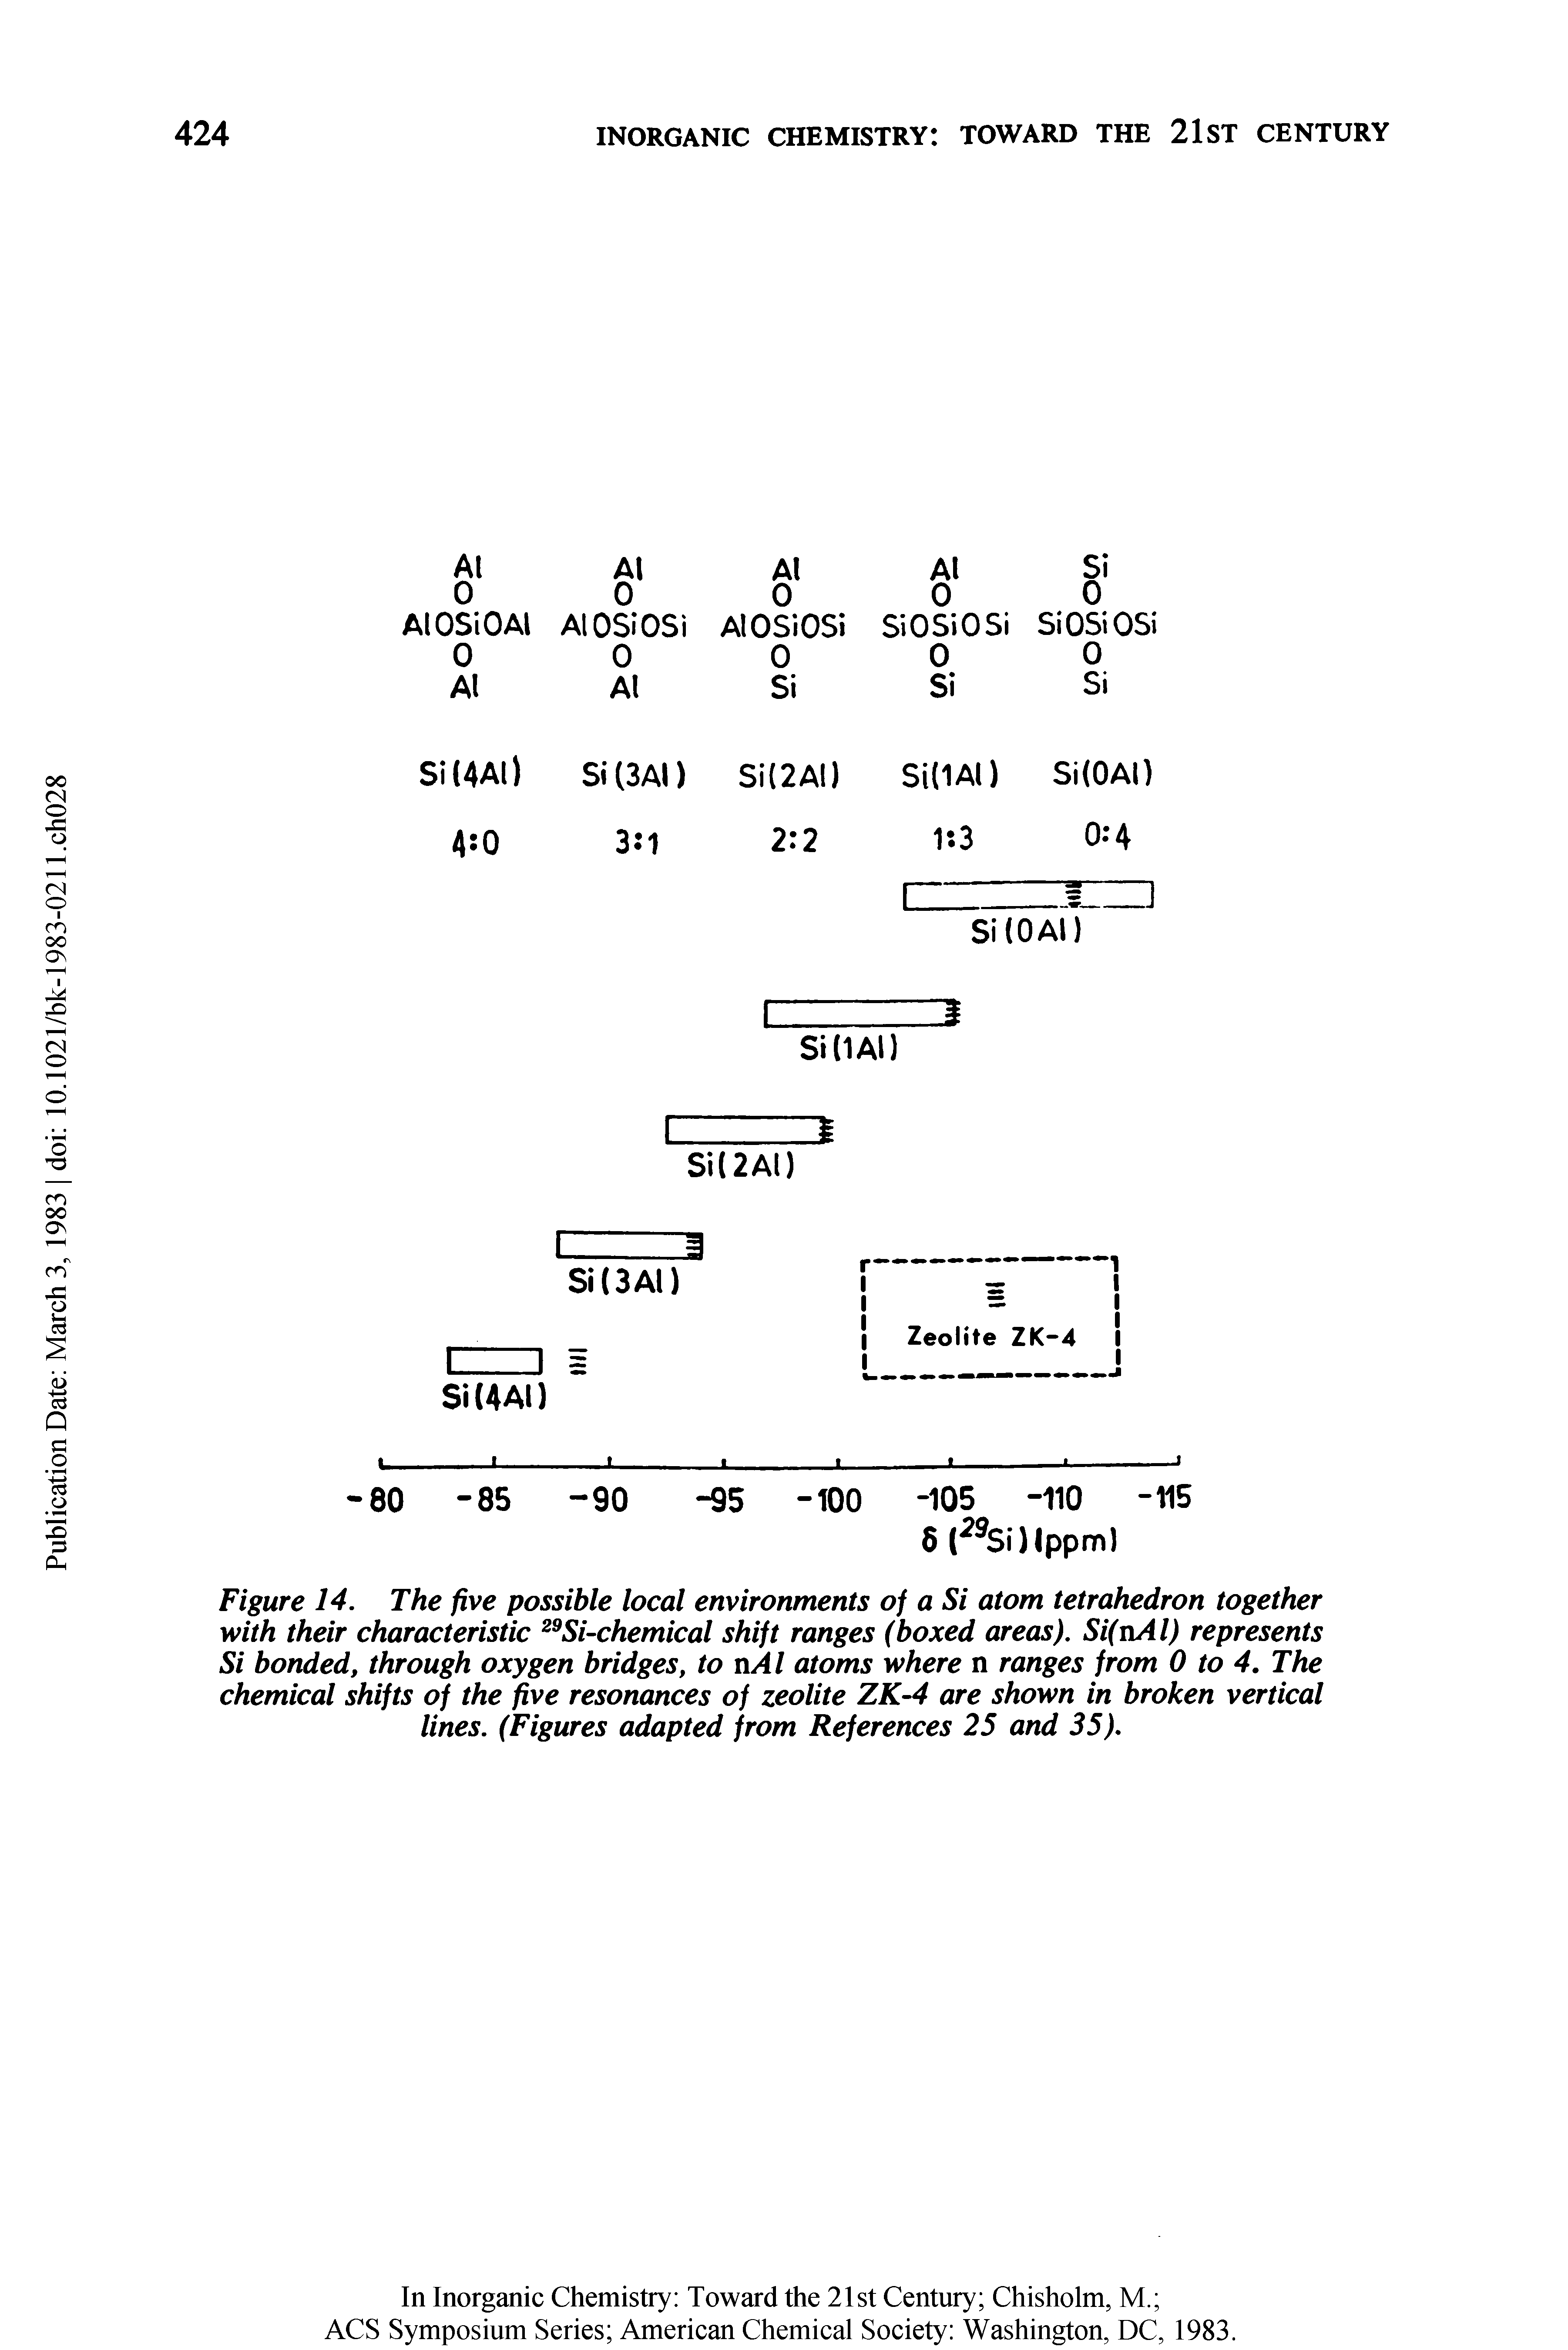 Figure 14. The five possible local environments of a Si atom tetrahedron together with their characteristic 29Si-chemical shift ranges (boxed areas). Si(aAl) represents Si bonded, through oxygen bridges, to nAl atoms where n ranges from 0 to 4. The chemical shifts of the five resonances of zeolite ZK-4 are shown in broken vertical lines. (Figures adapted from References 25 and 35).